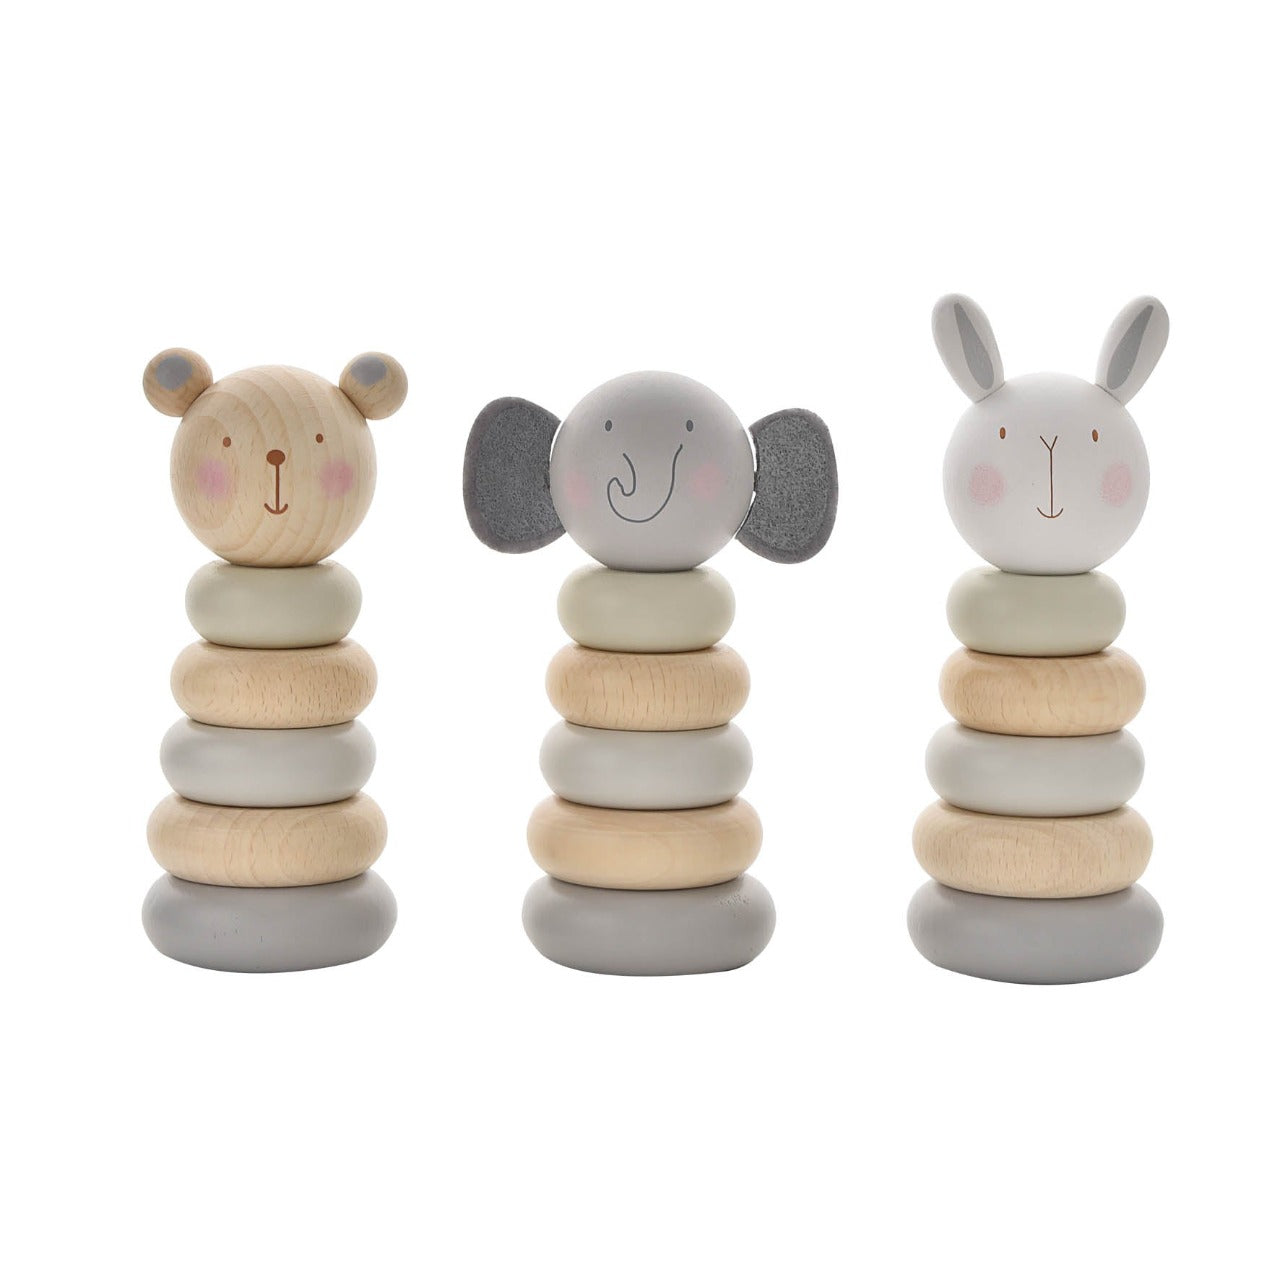 Bambino Wooden Stacking Toy  Help your little one develop their problem solving and coordination skills with one of these adorable wooden character stacking ring toys. From BAMBINO BY JULIANA® - opening new eyes to a world of wonder.